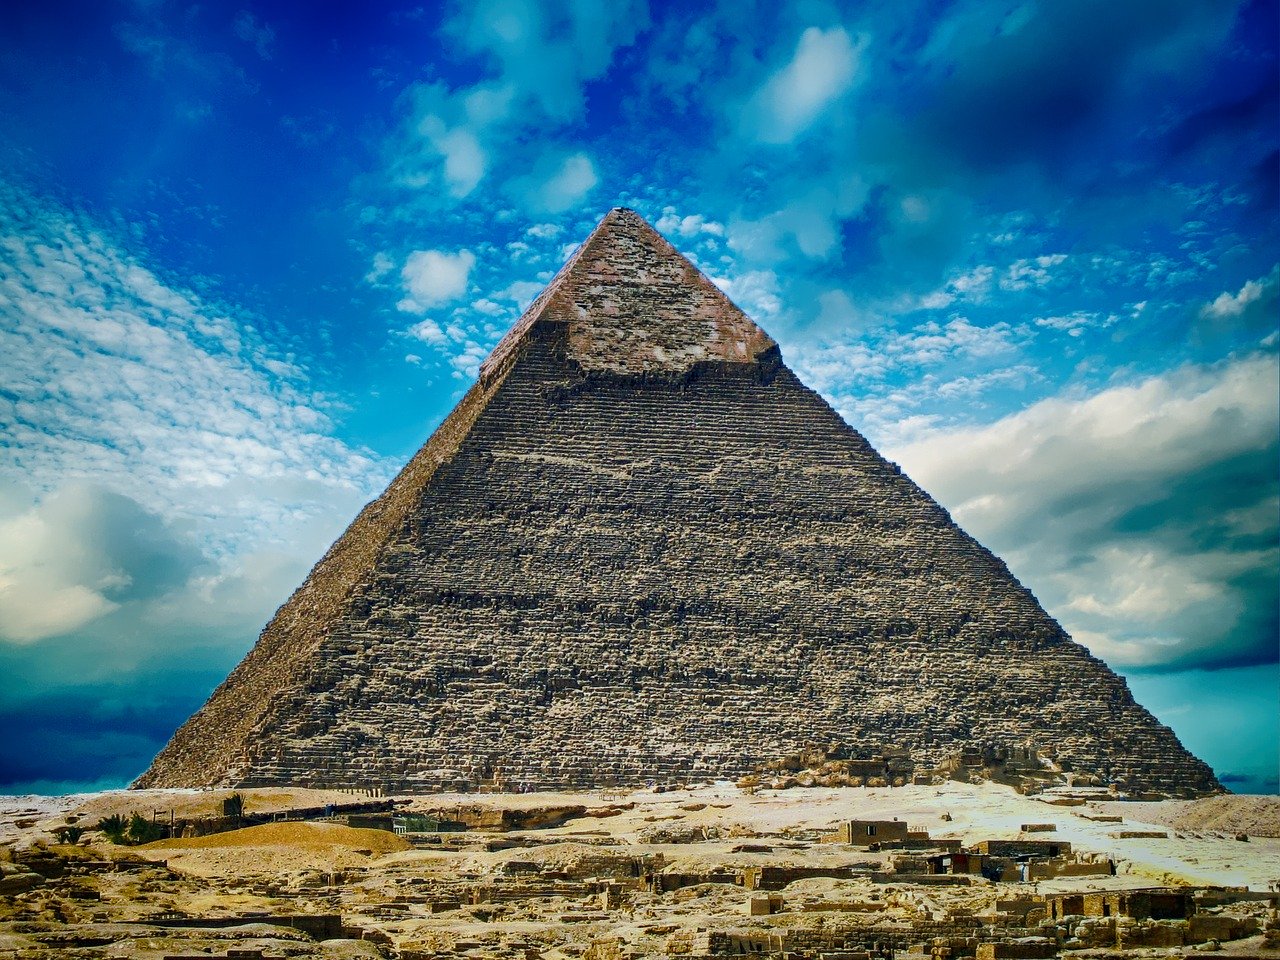 Seven wonders of the ancient world -An imaginary picture of the Great Pyramid of Giza